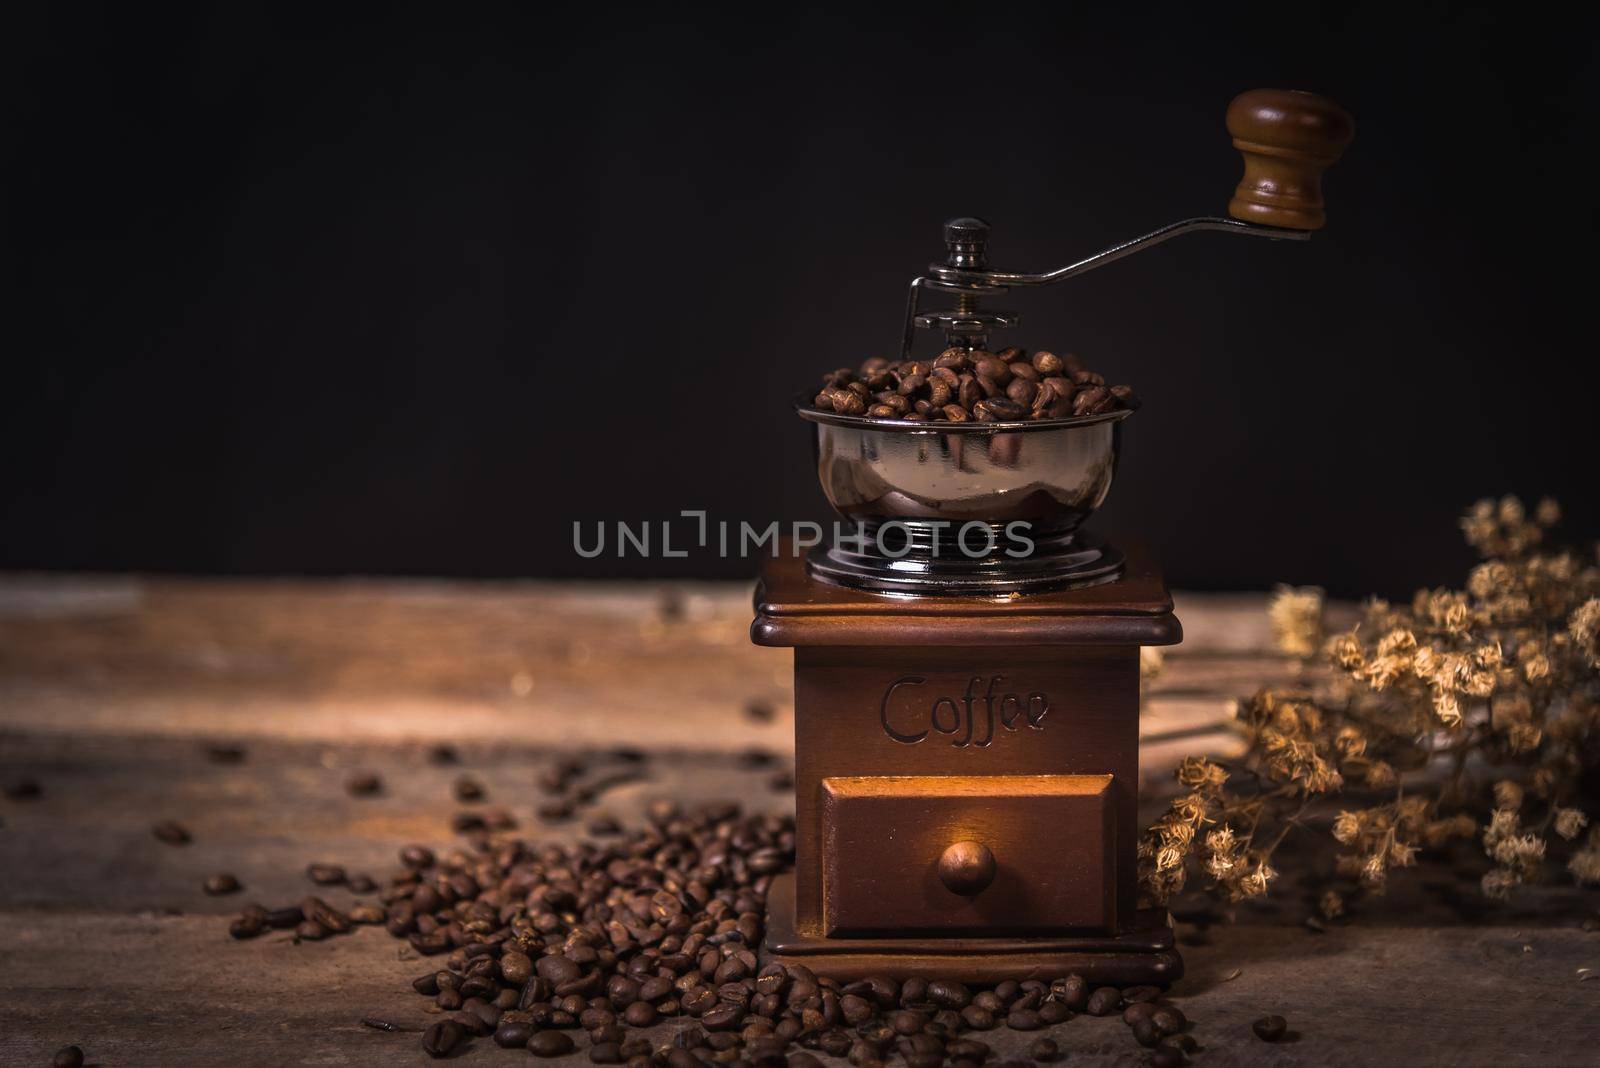 Coffee grinder and coffee beans by Wmpix